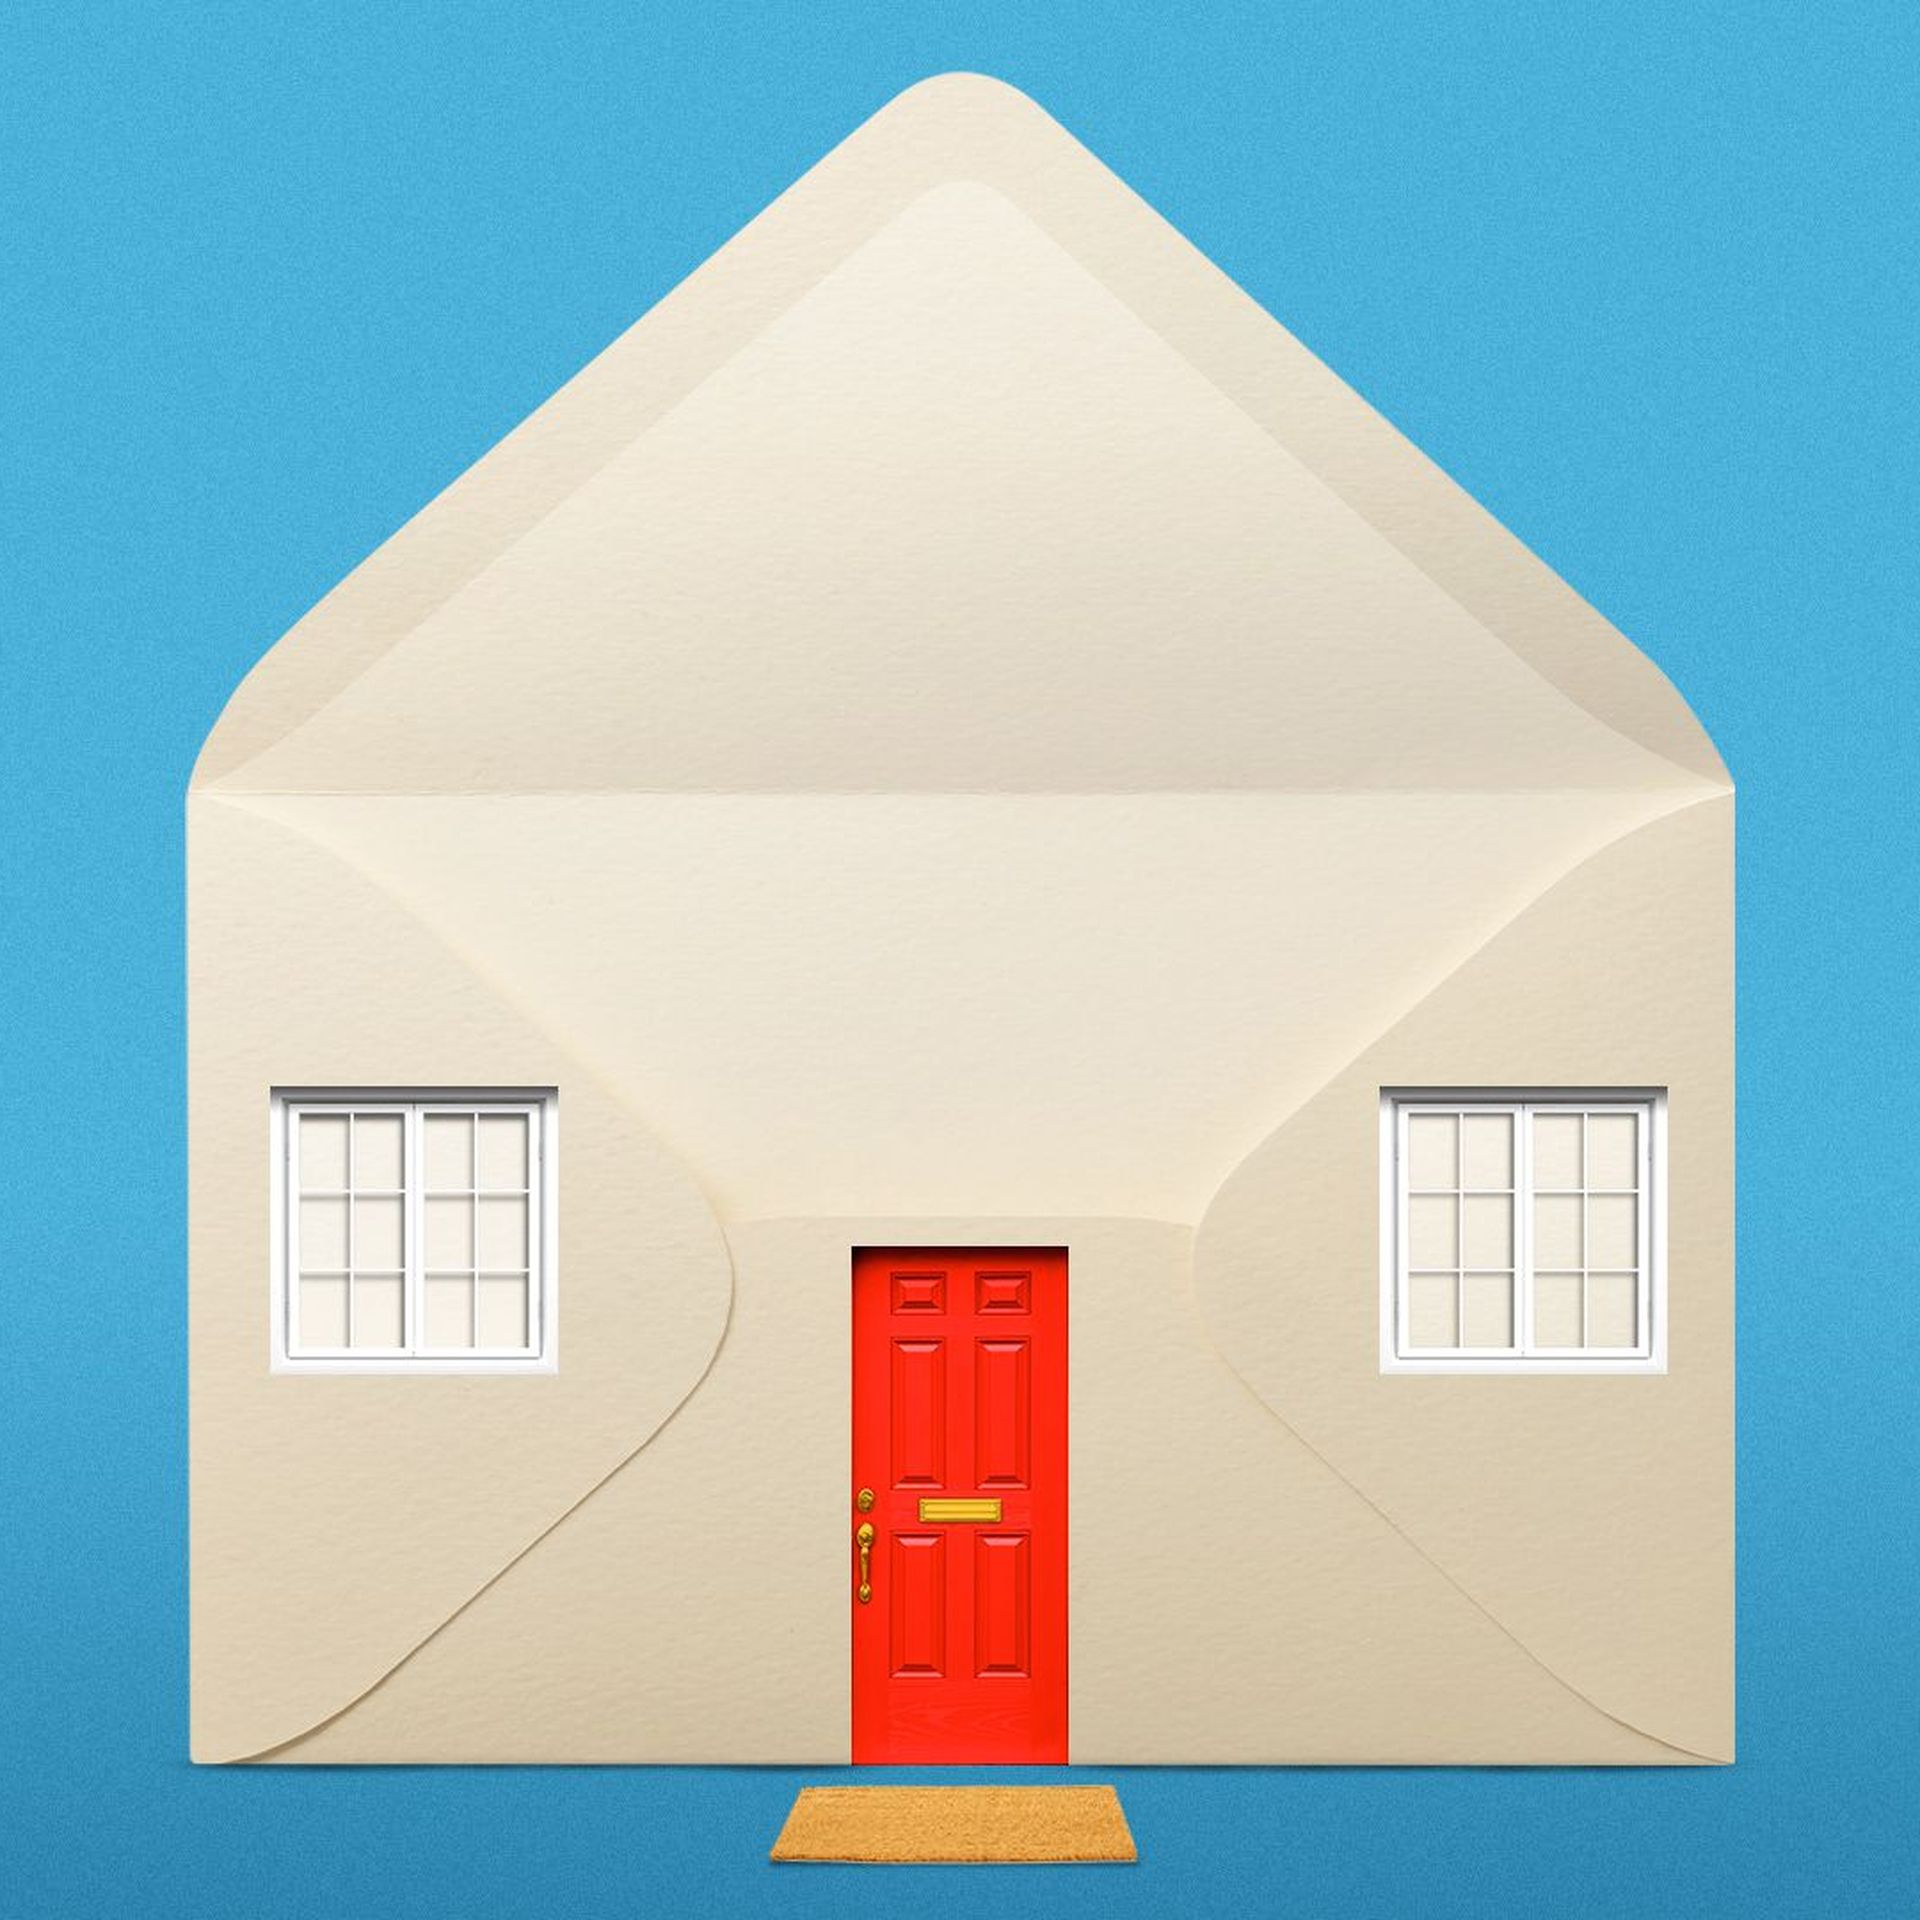 Illustration of an open envelope stylized as a house with a door, windows and a welcome mat.   